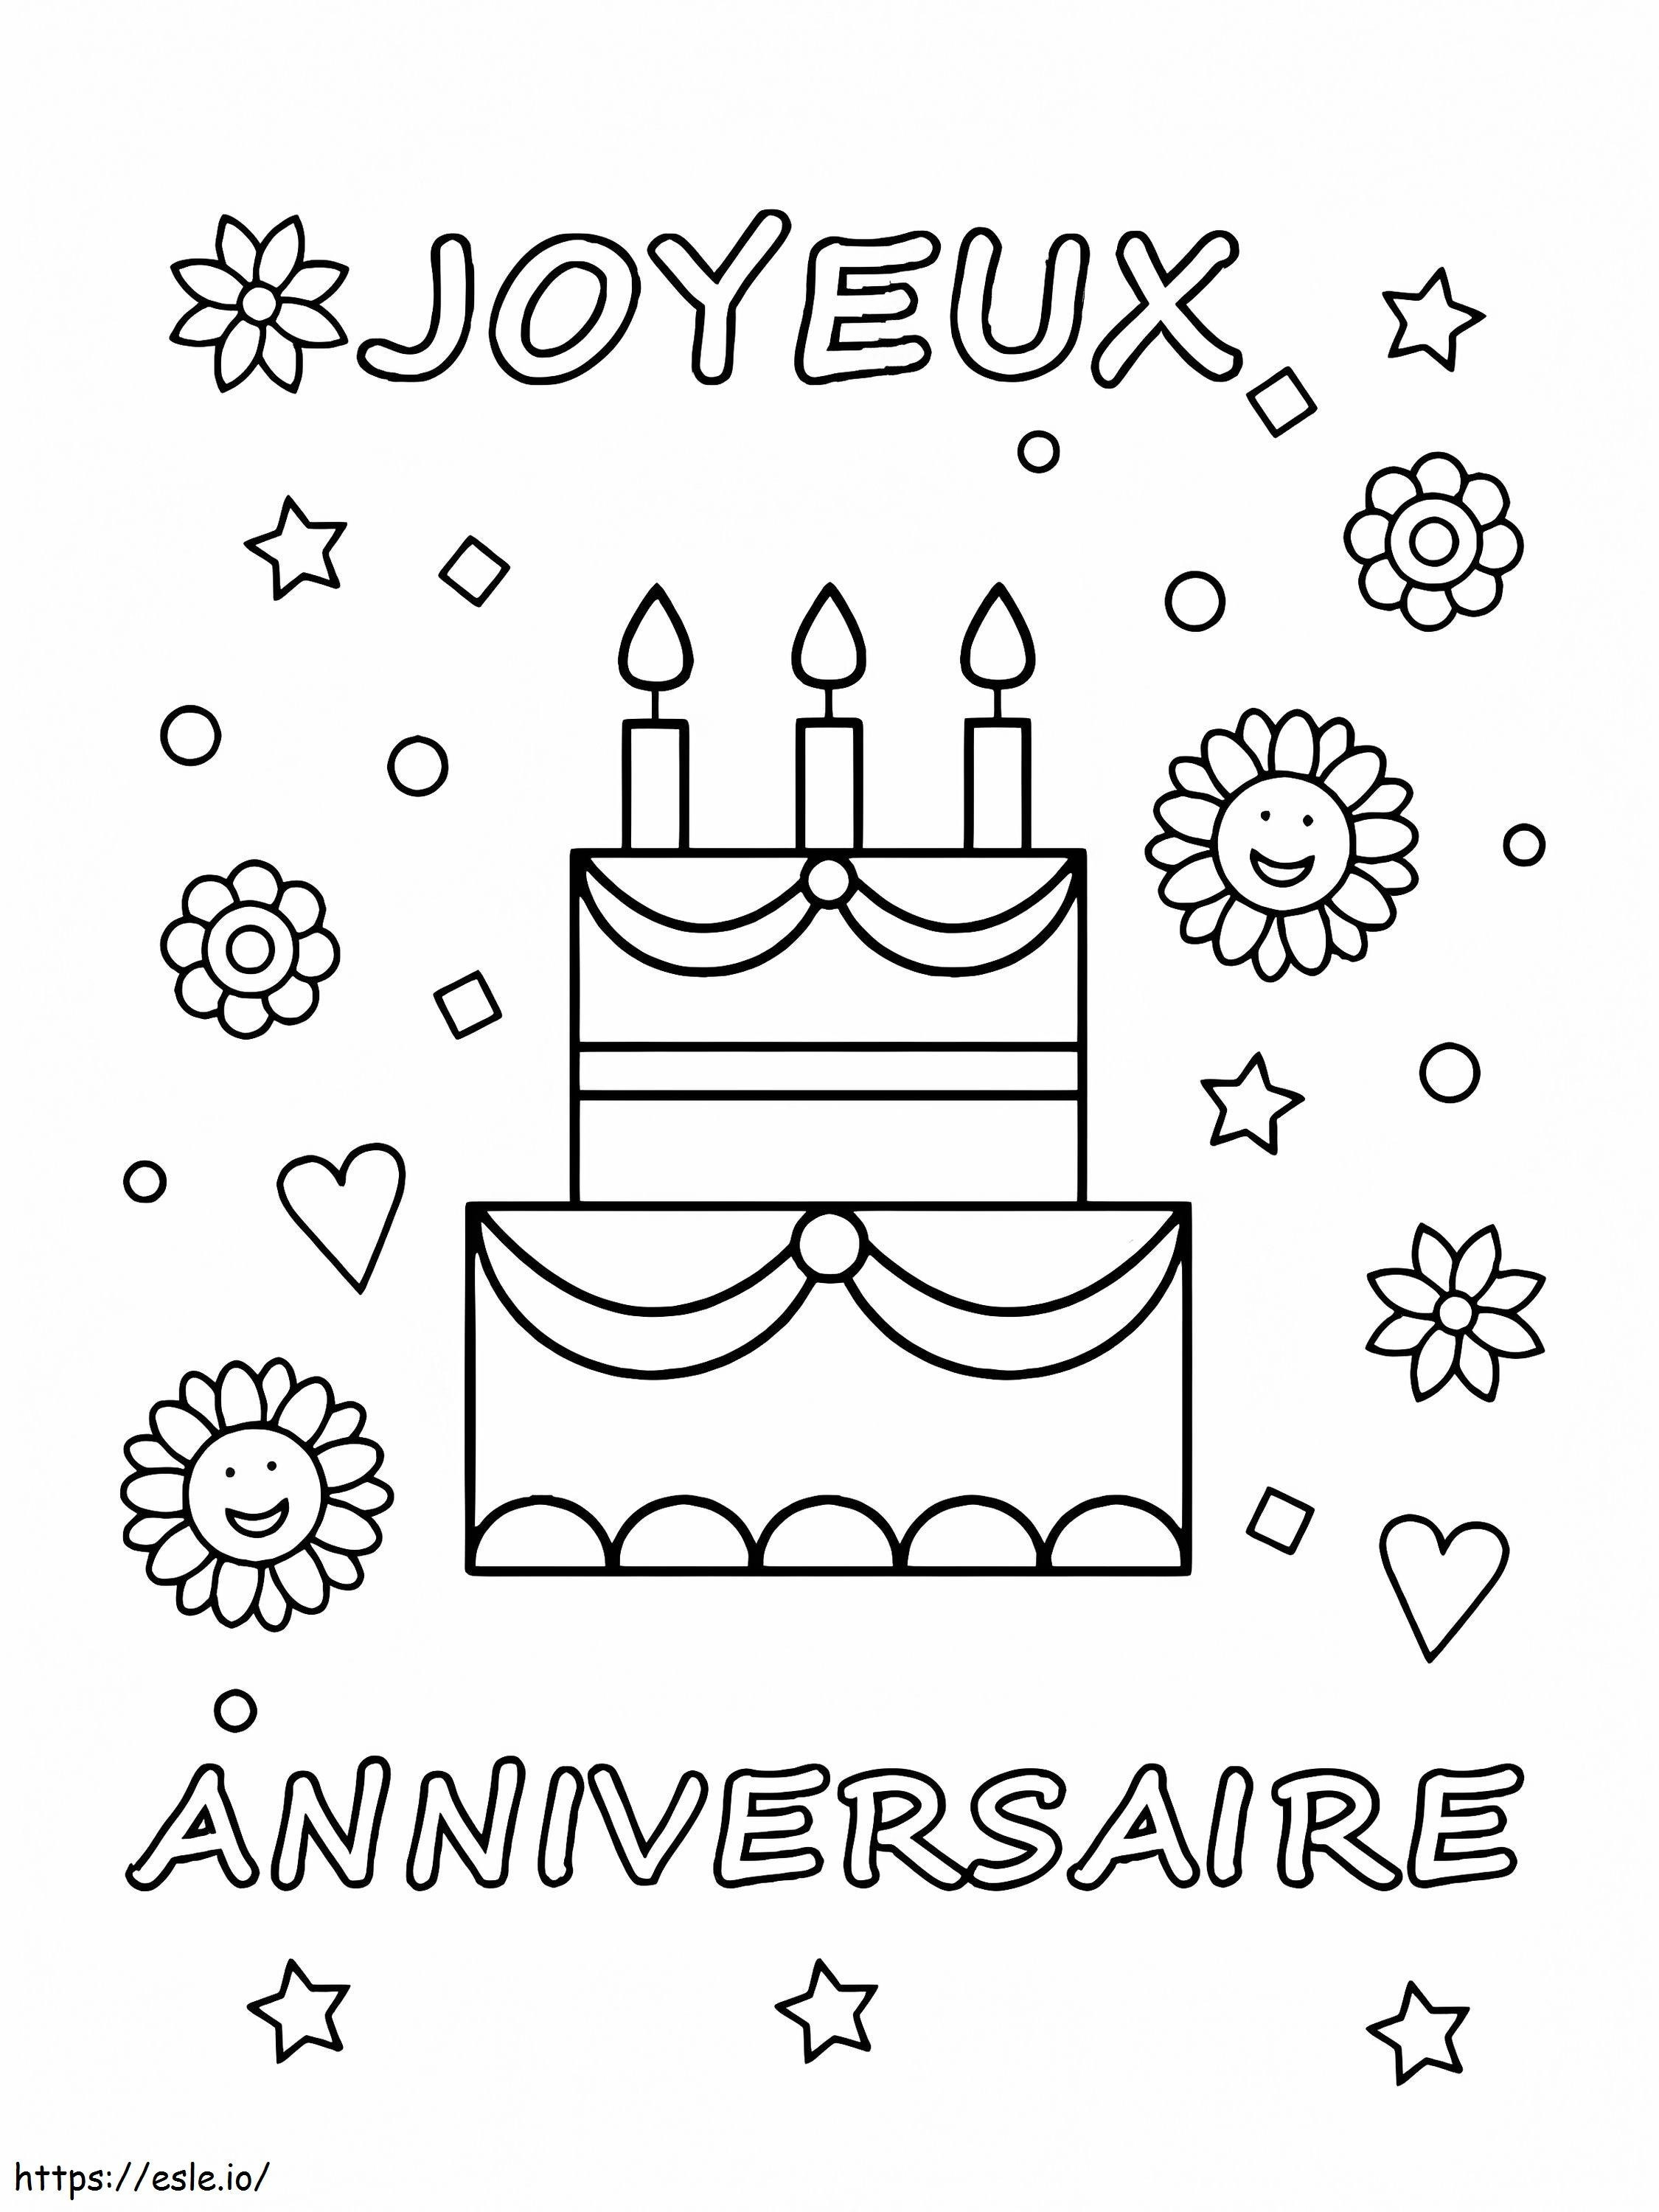 Happy Birthday To You coloring page